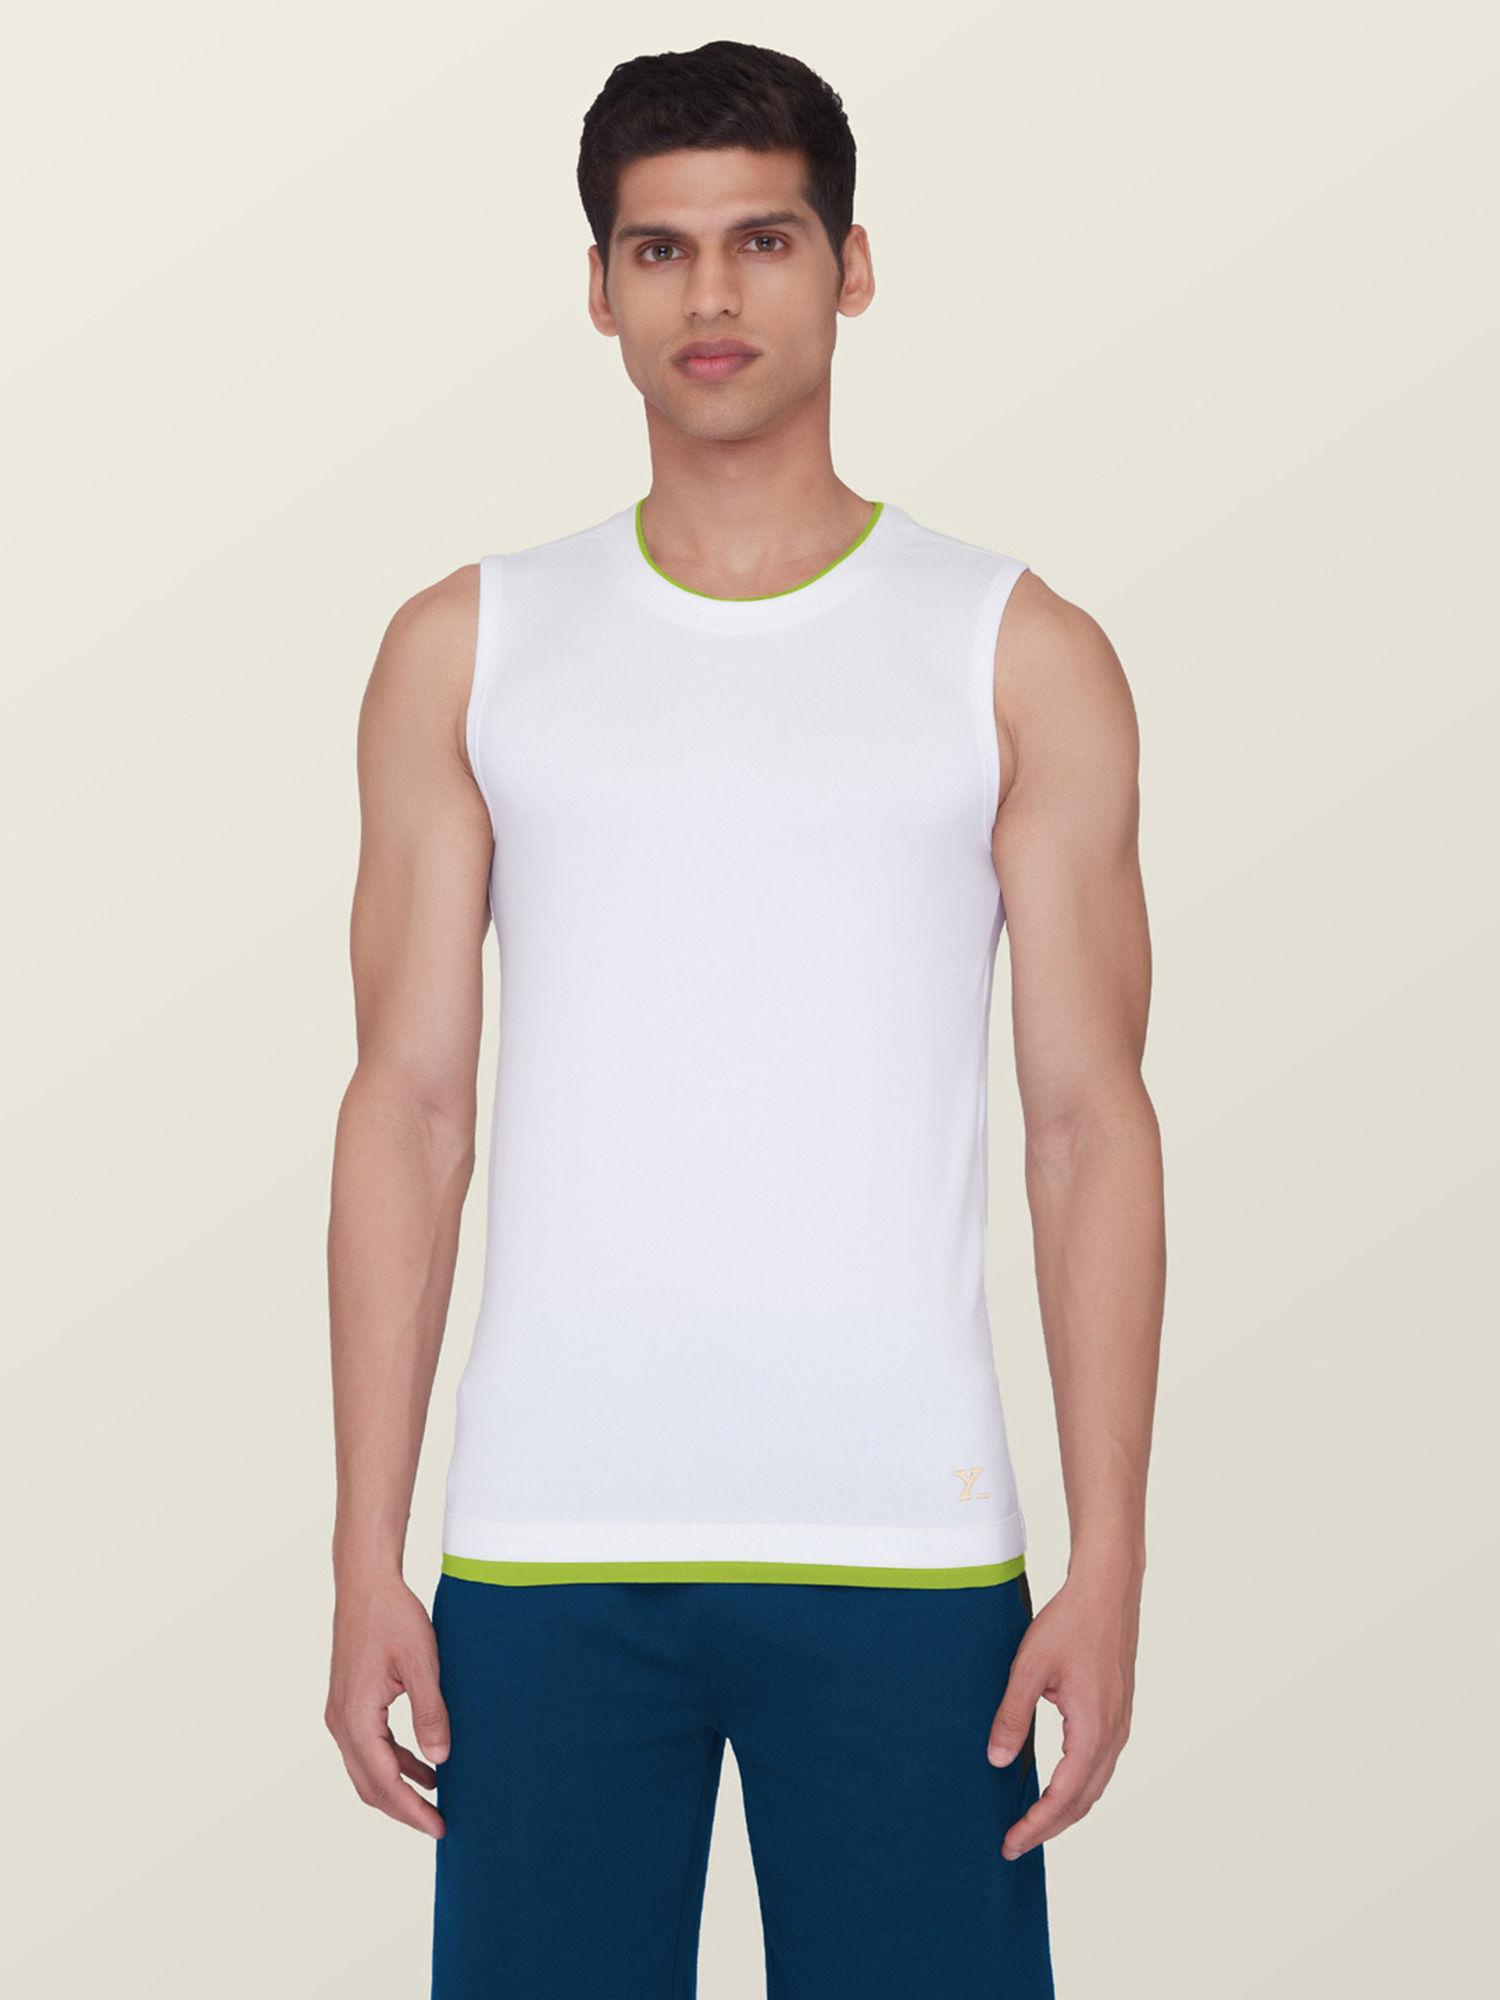 mens super combed cotton gym vest for men with anti-bacterial silver finish white